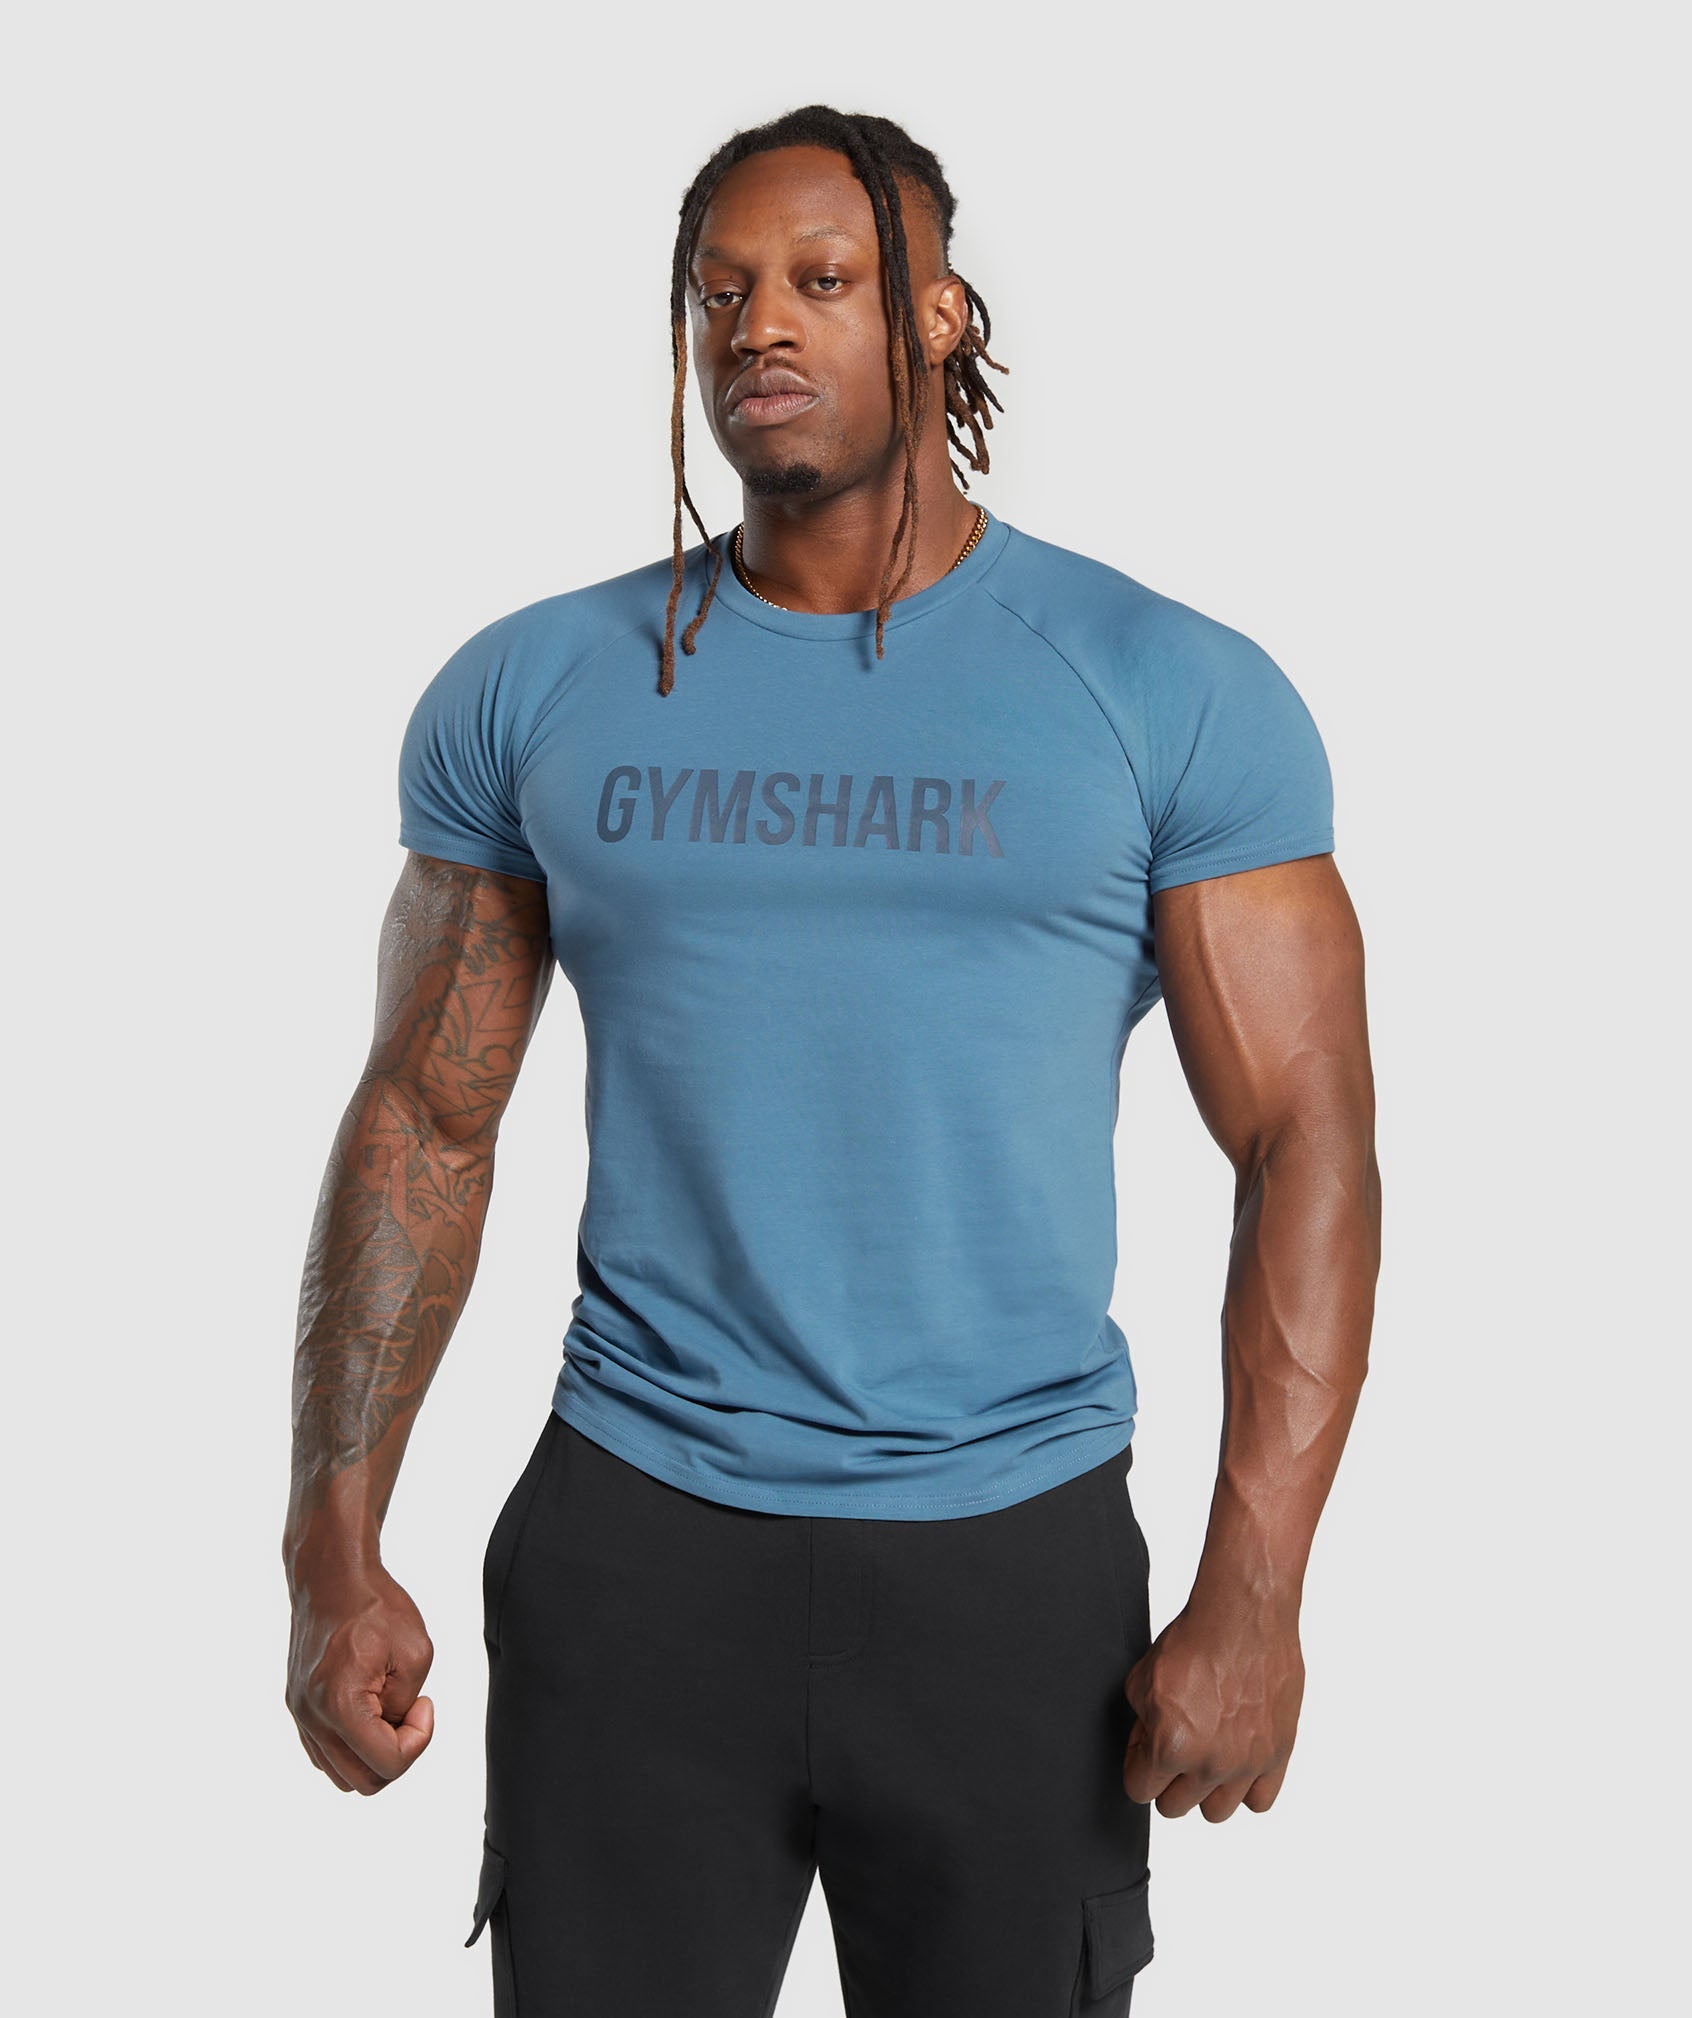 Gymshark Apollo T-shirt Review 